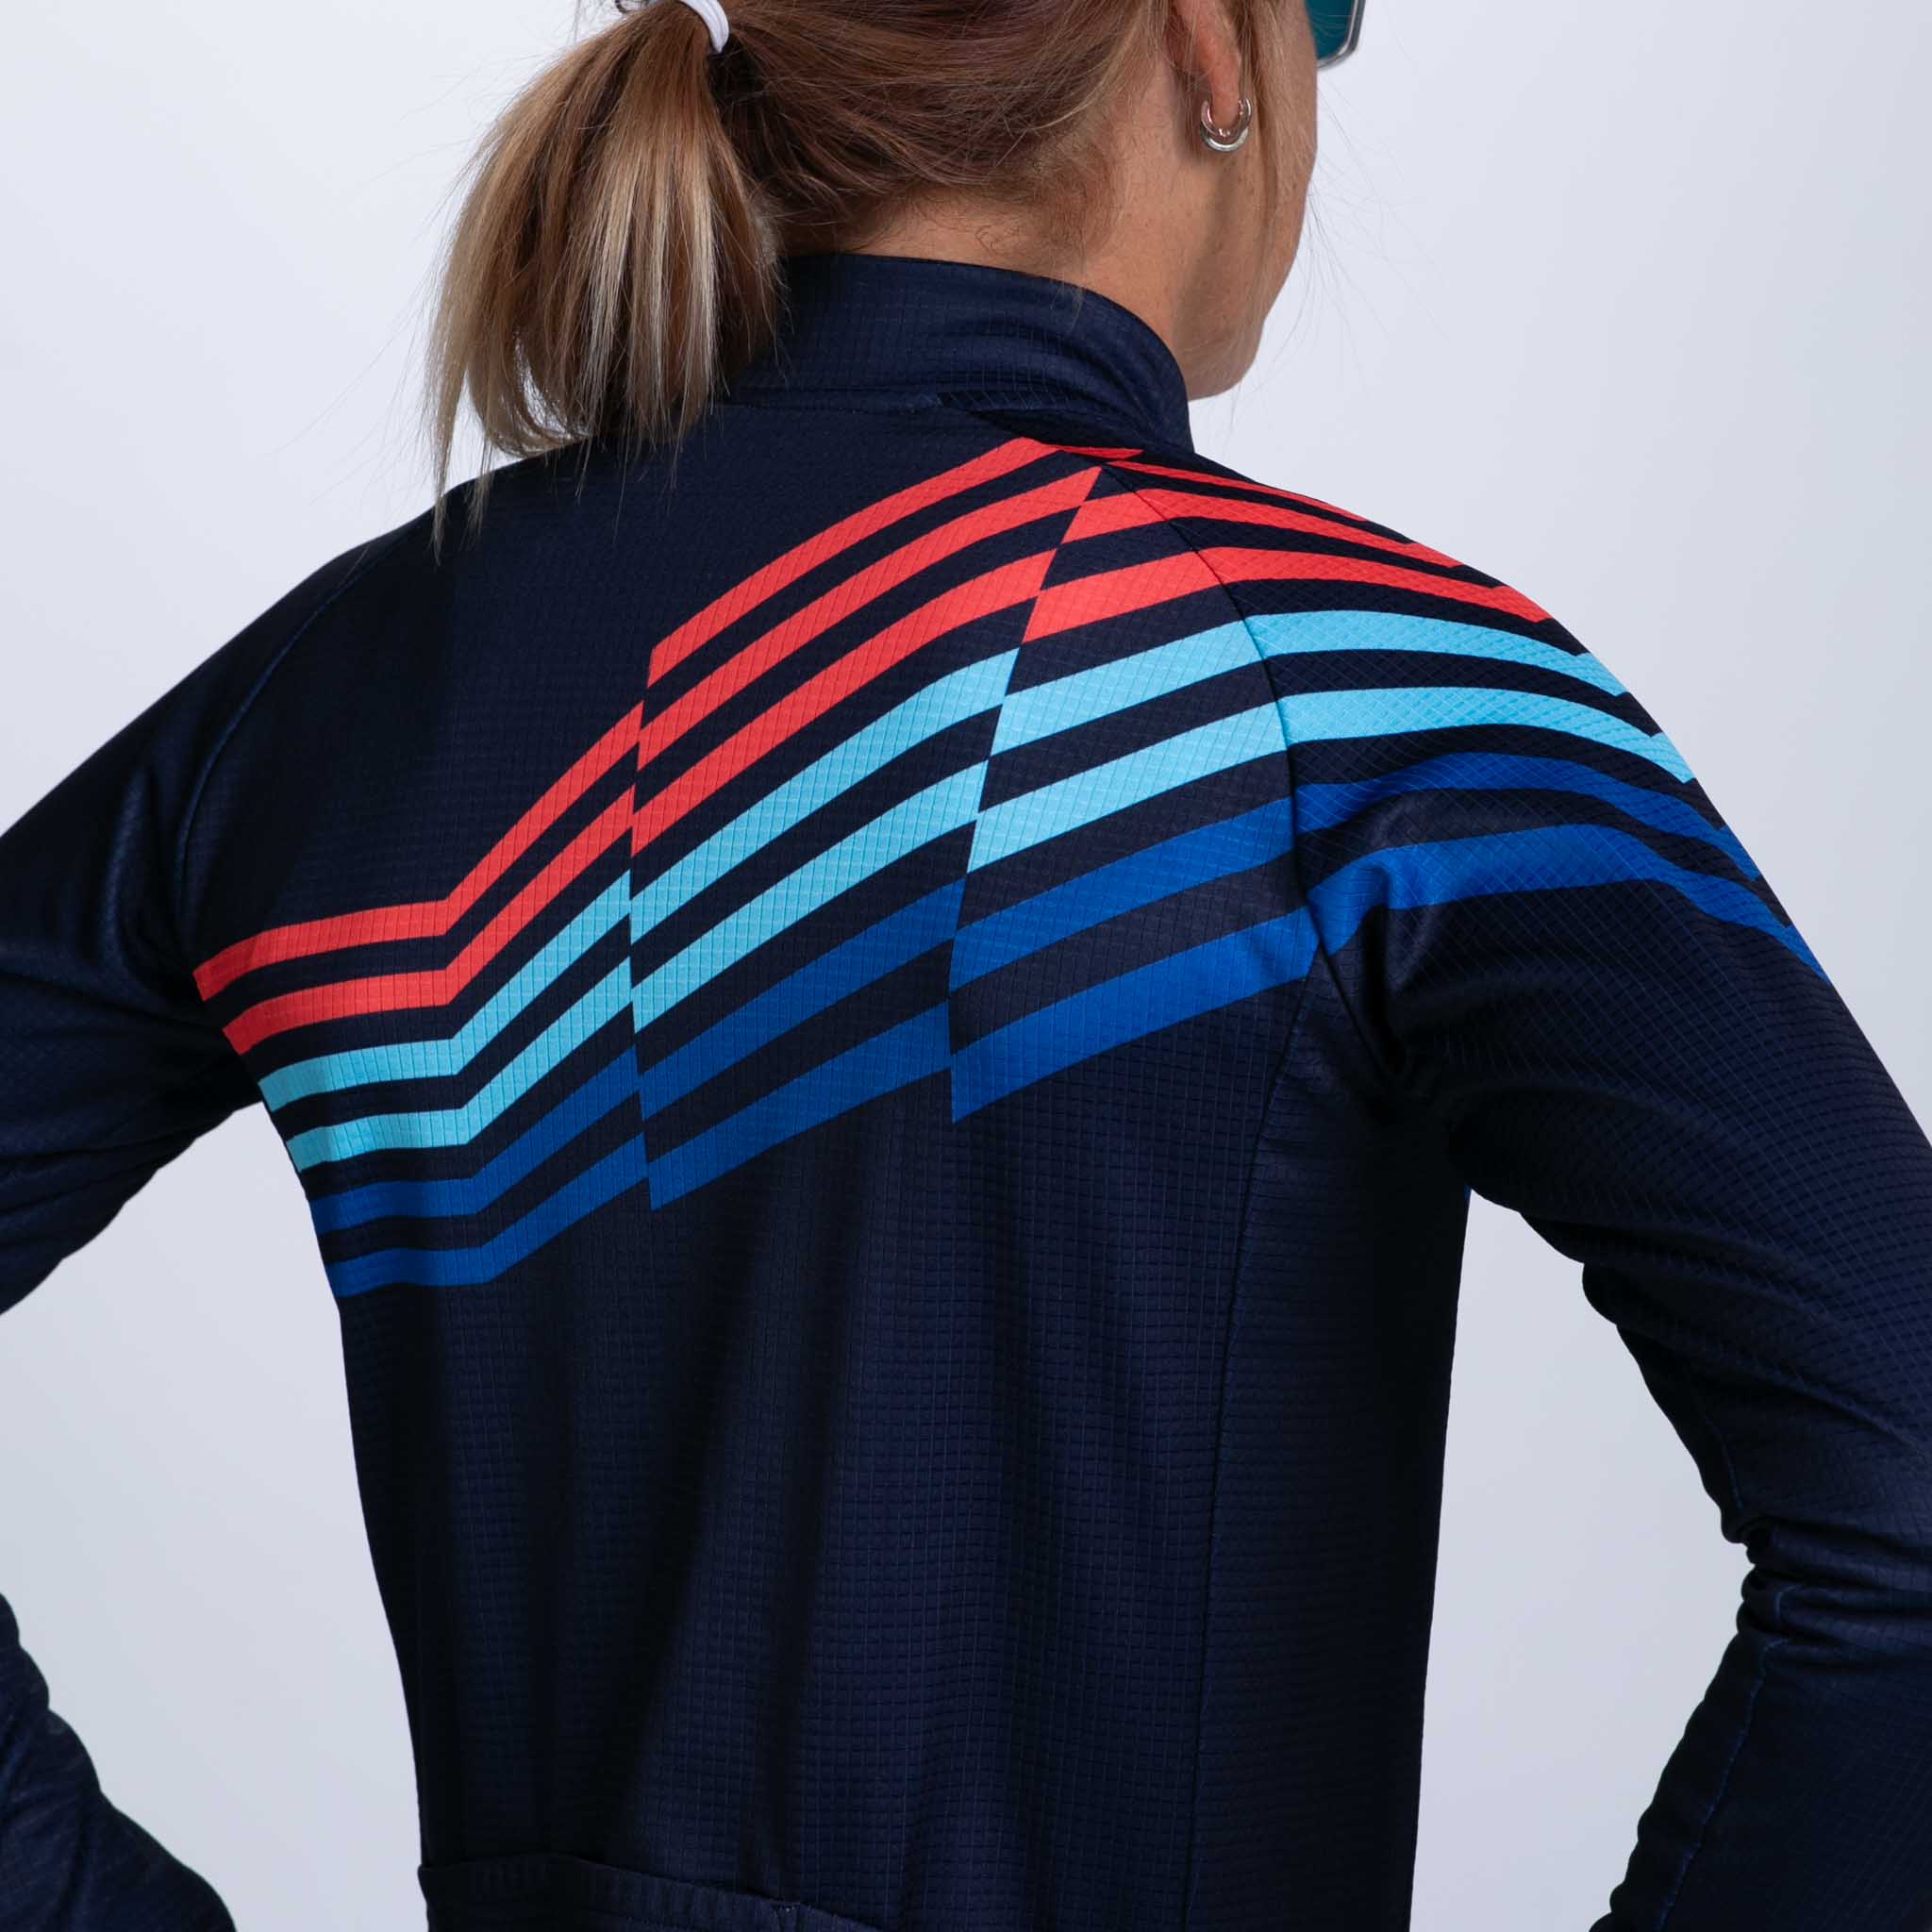 Zoot Sports CYCLE JERSEYS Women's Ltd Cycle Thermo Jersey - Cote d'Azur